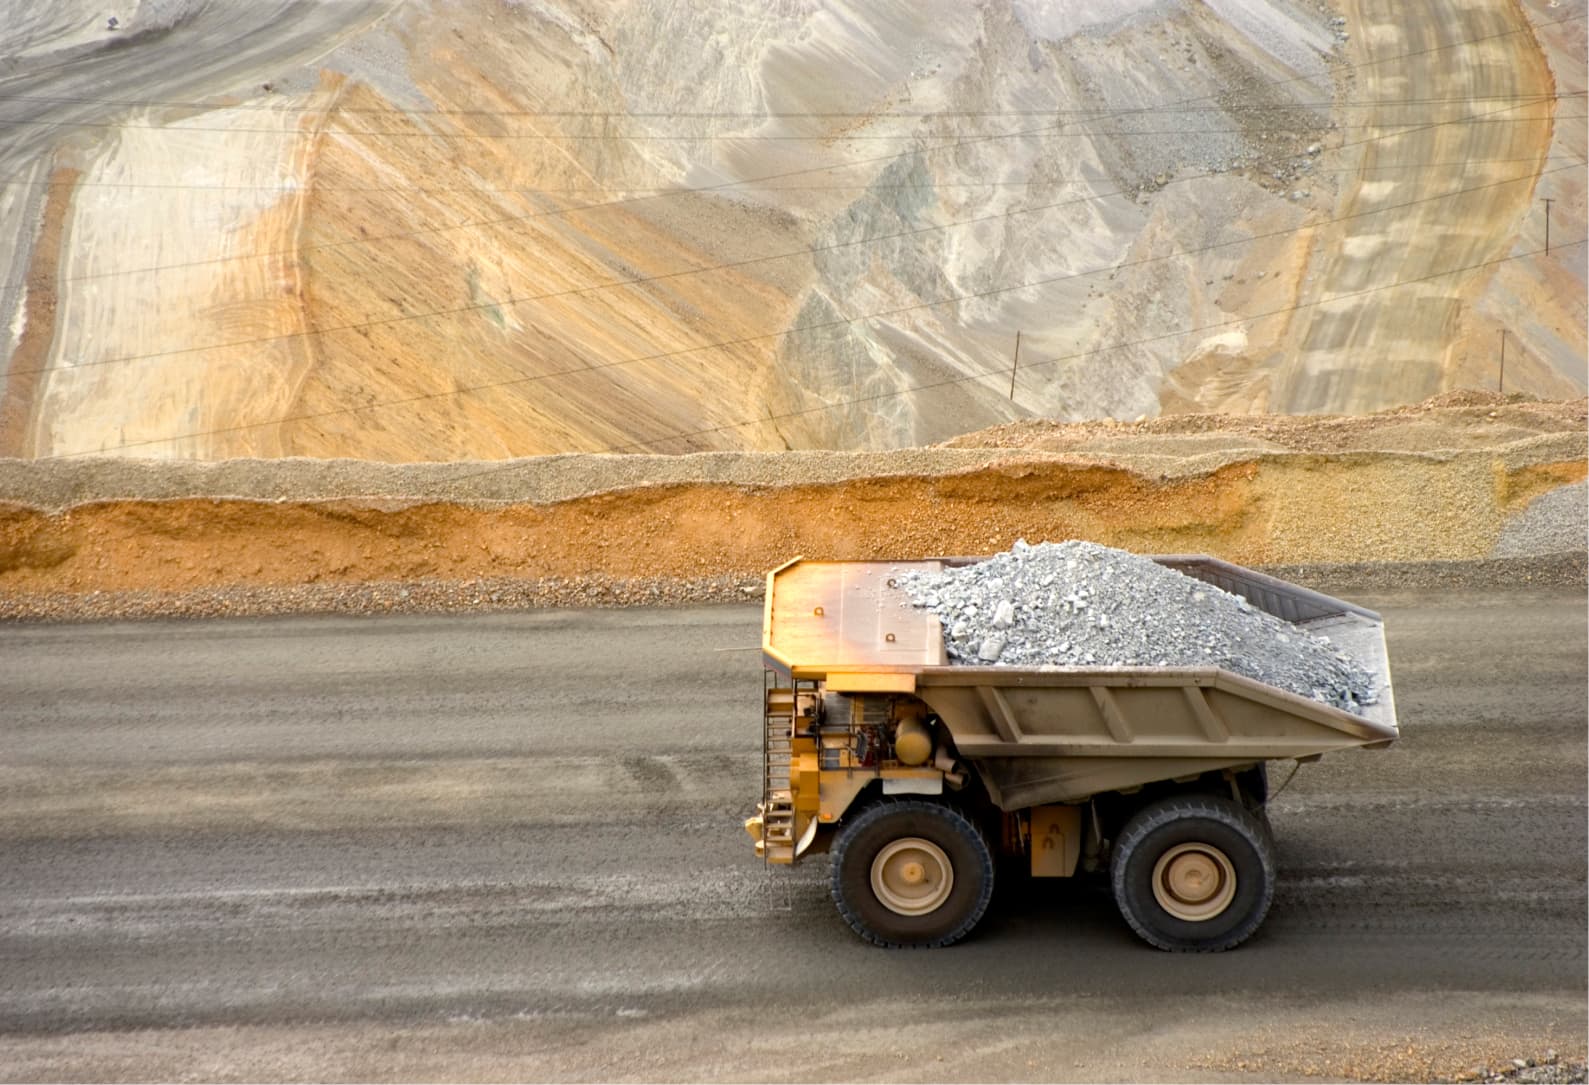 large truck carrying mined minerals